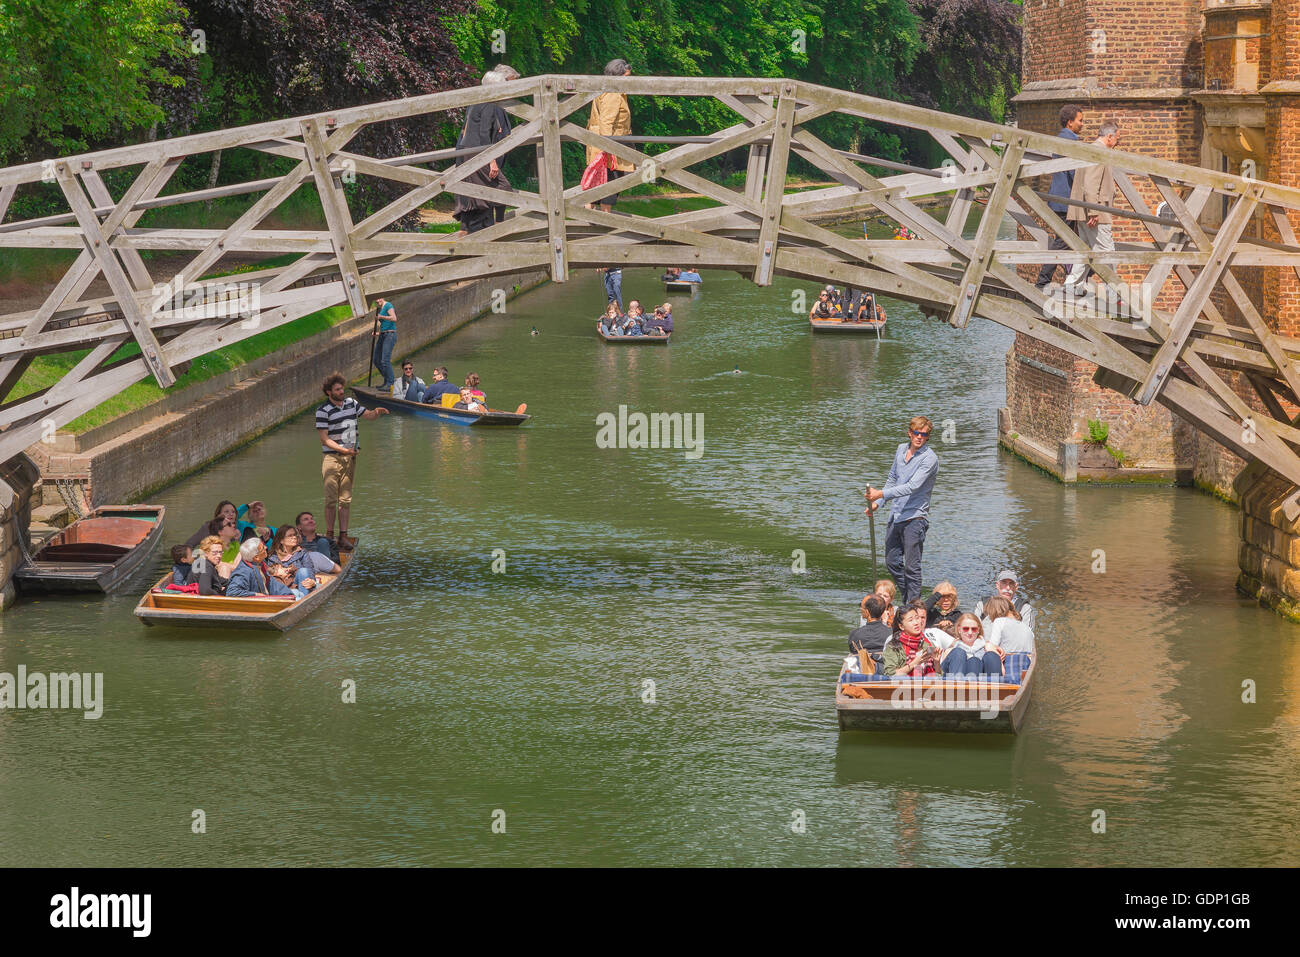 Punting Cambridge, tourists in punts glide under the famous wooden Mathematical Bridge in Cambridge, England. Stock Photo